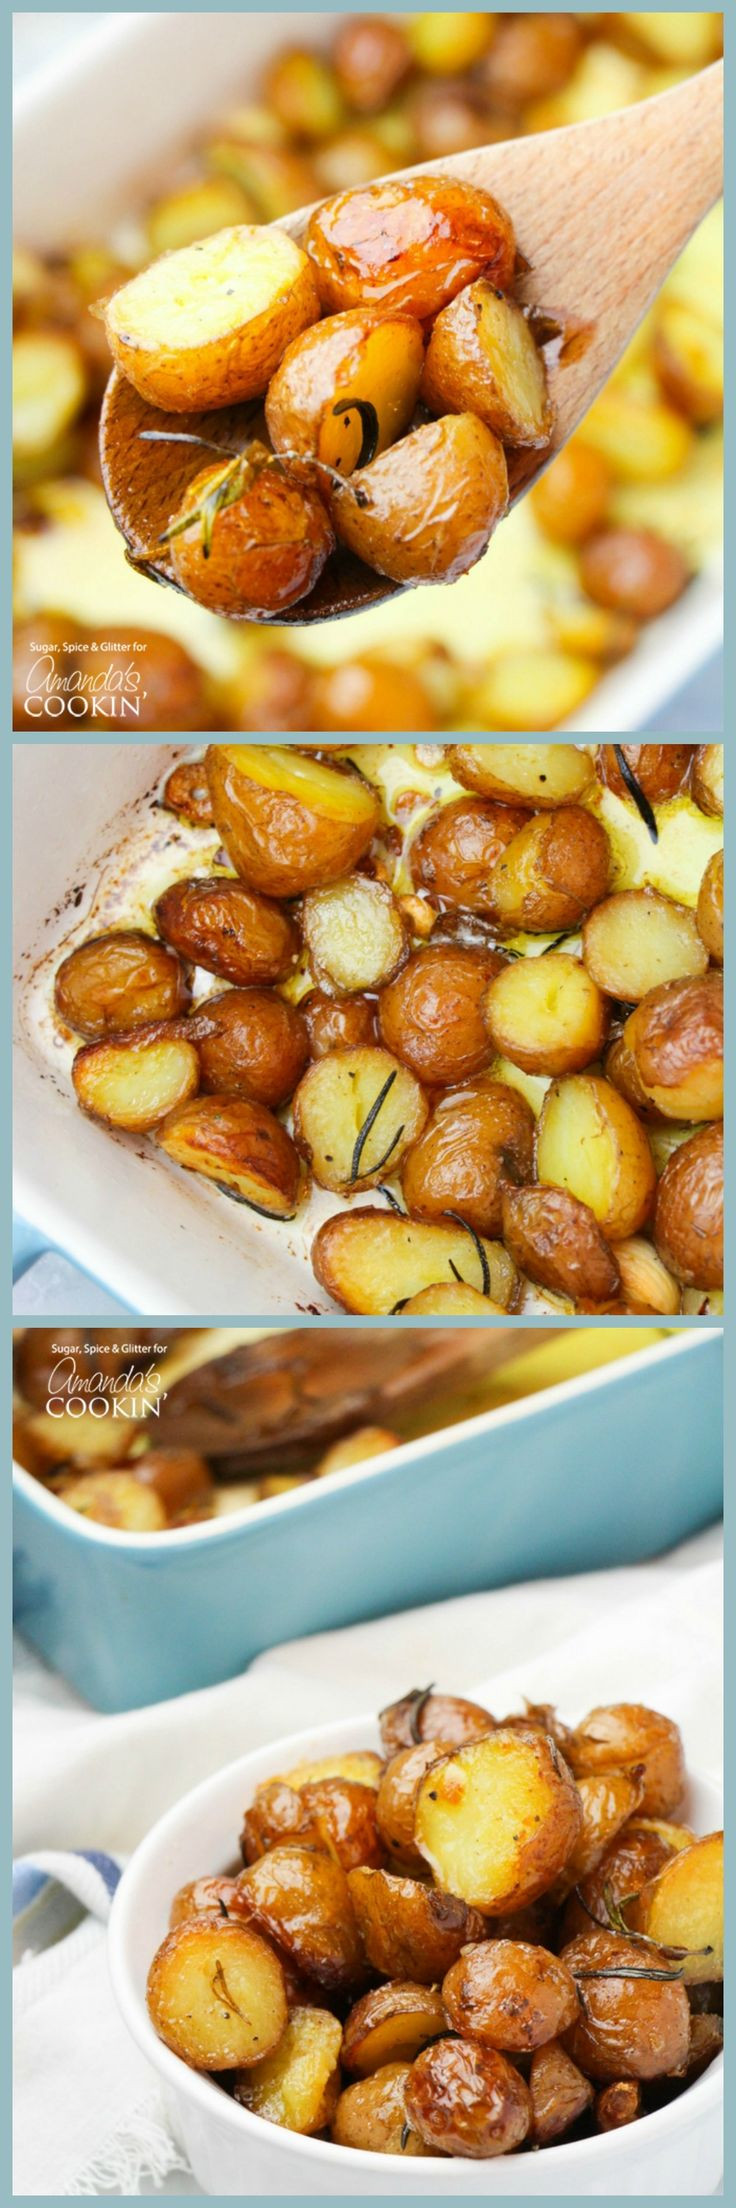 Potatoes Thanksgiving Side Dishes
 Best 25 Side dish recipes ideas on Pinterest